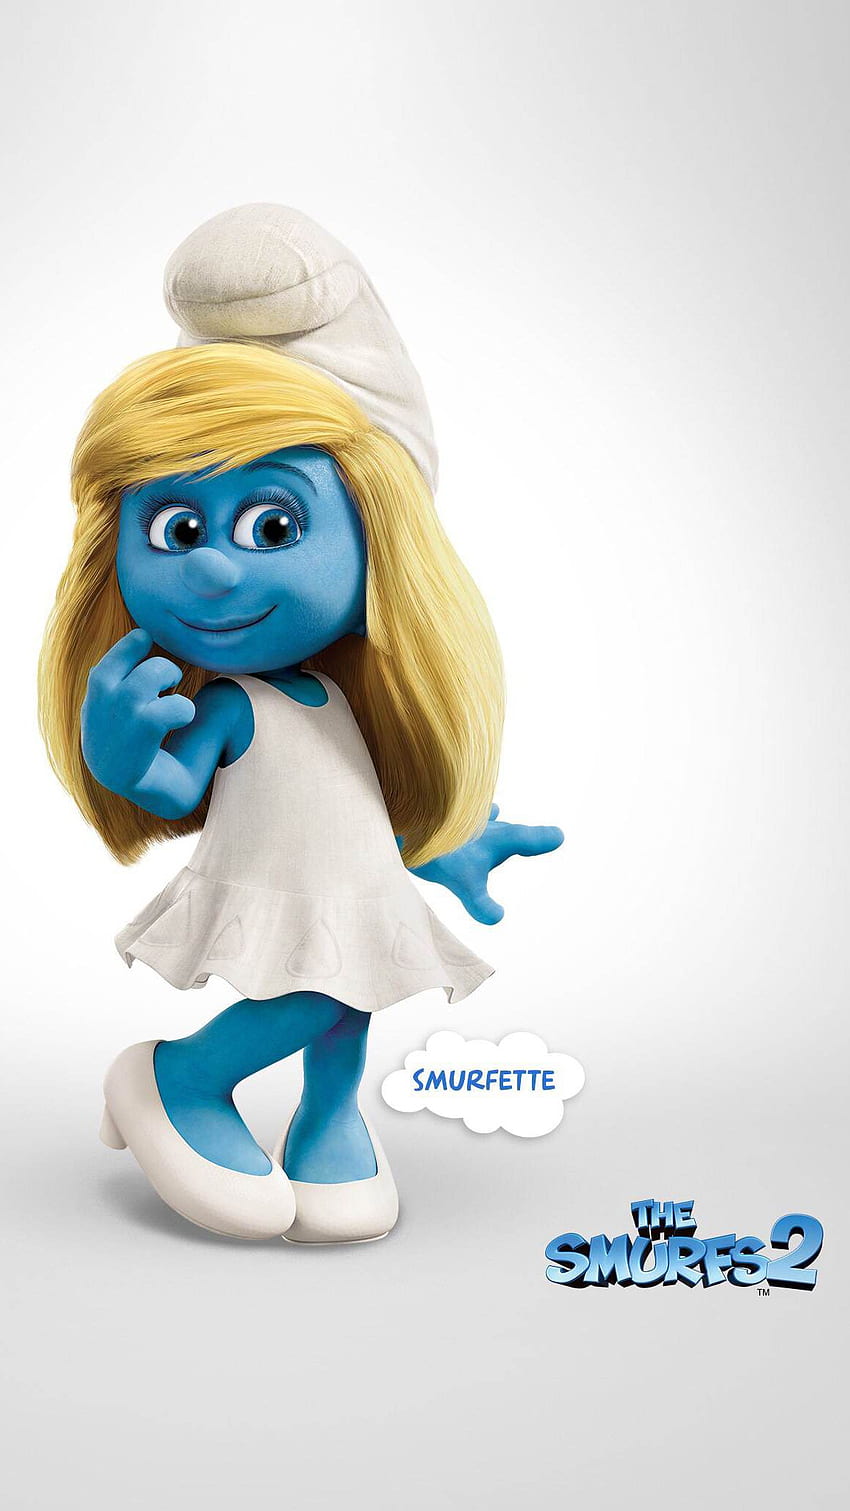 Smurfette for iPhone 11, Pro Max, X, 8, 7, 6 - on 3, Smurfs HD phone wallpaper